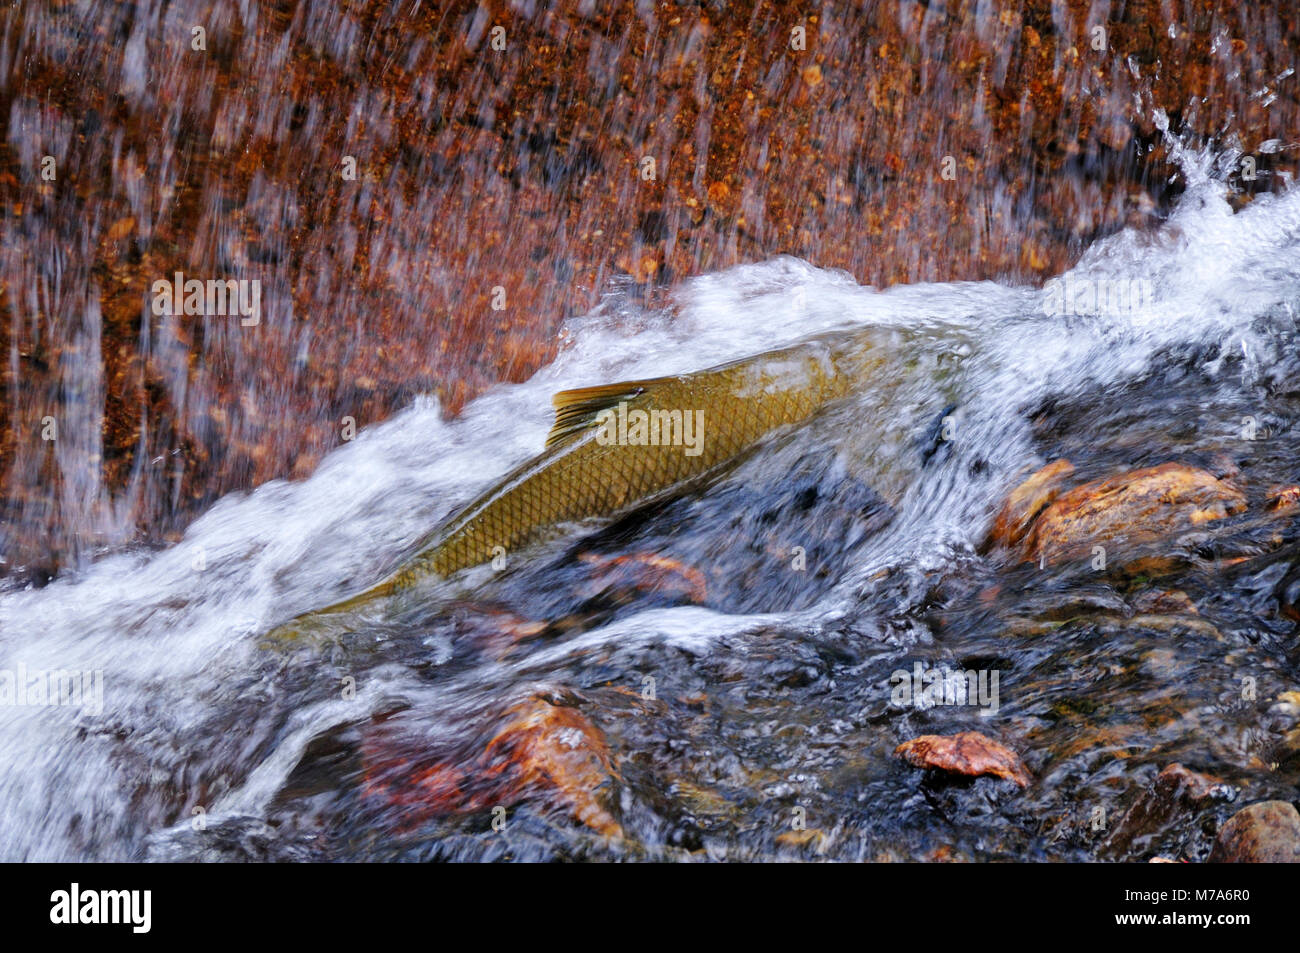 Fish at the Monfrague National Park. Spain Stock Photo